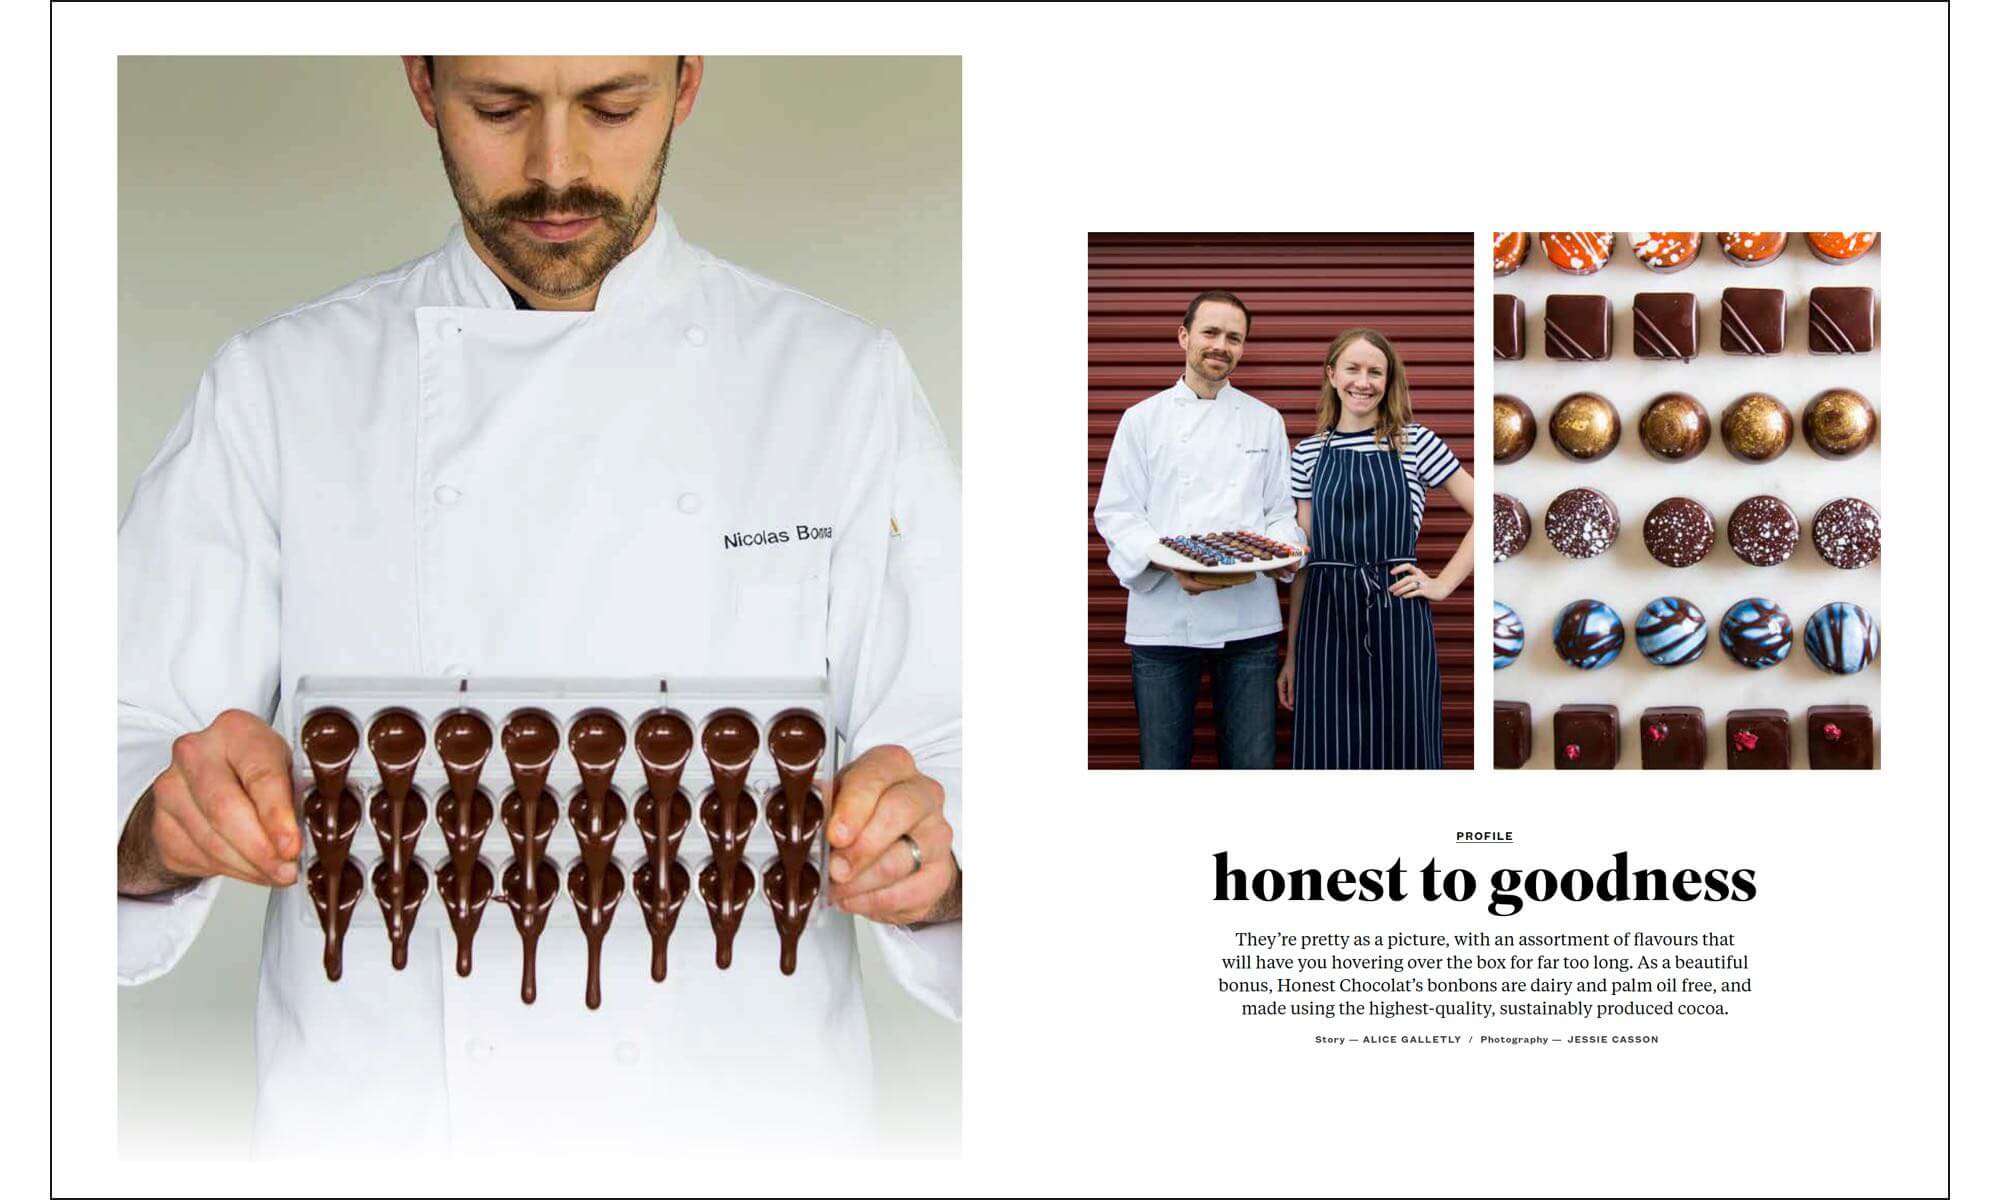 Article about Honest Chocolat